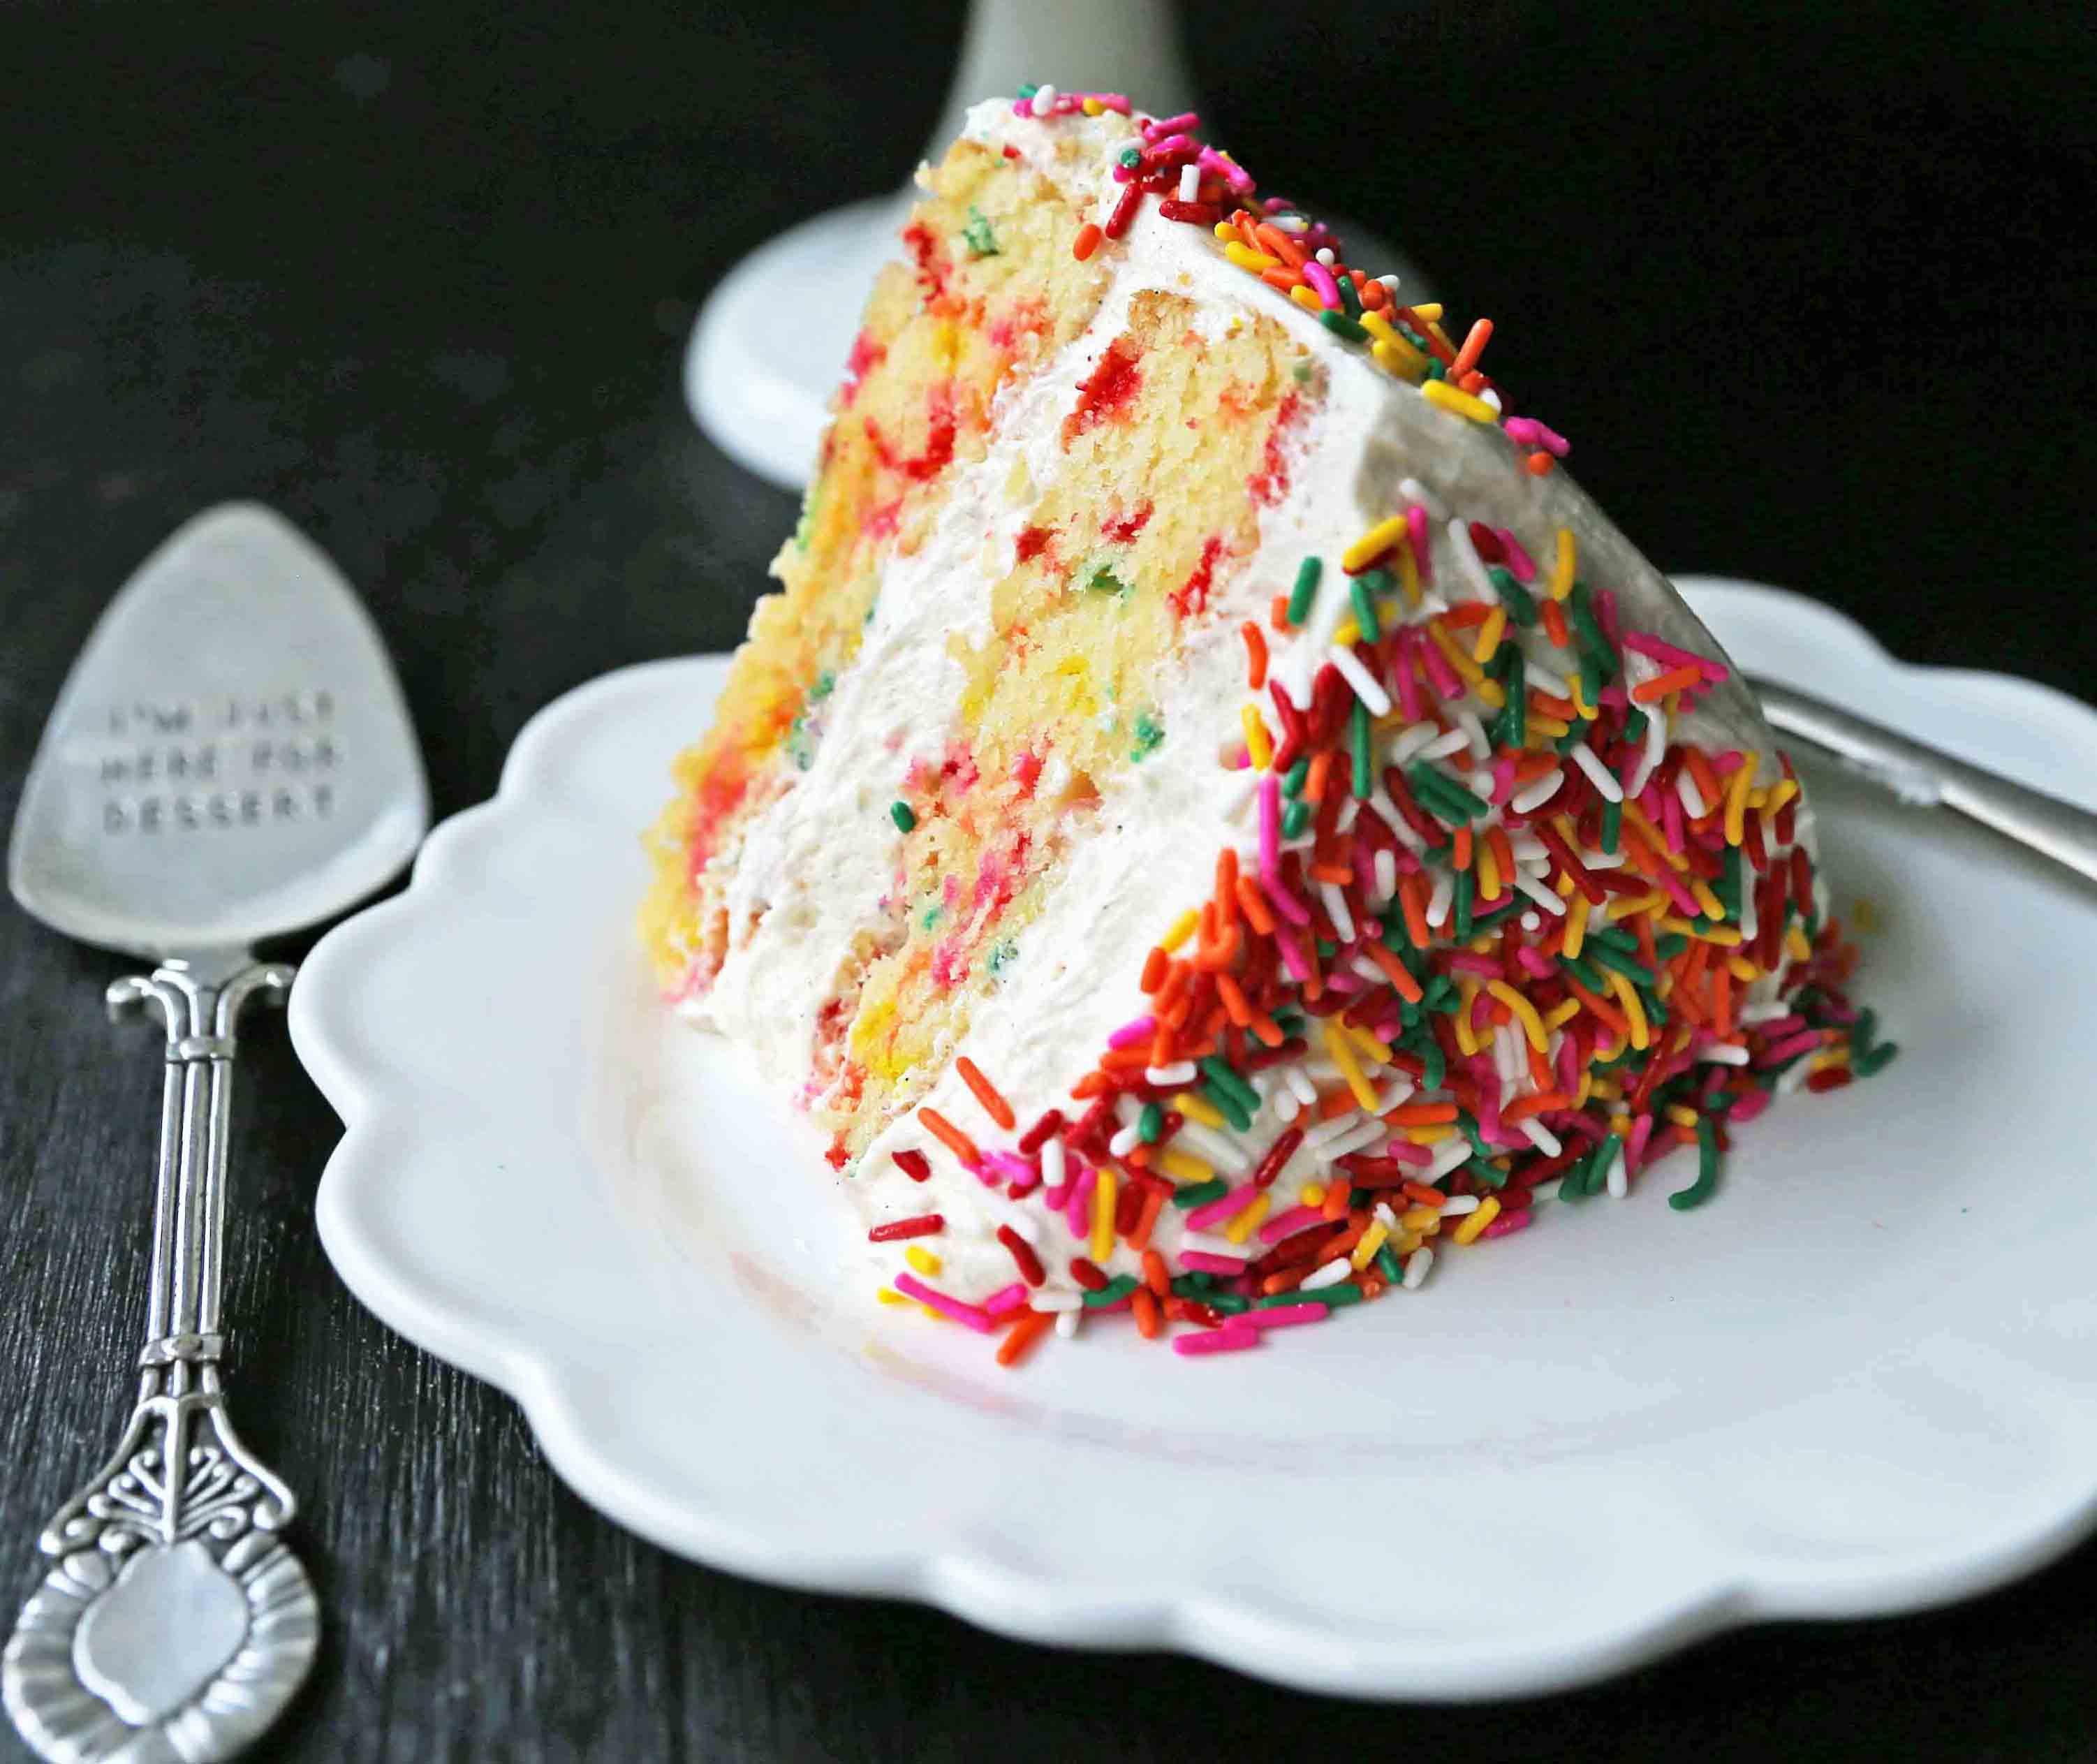 A fluffy homemade funfetti birthday cake with rainbow sprinkles topped with a light cream cheese buttercream frosting and an array of sprinkles. The perfect birthday cake! www.modernhoney.com #funfetti #funfetticake #sprinklescake #homemadefunfetticake #cake #homemadecake